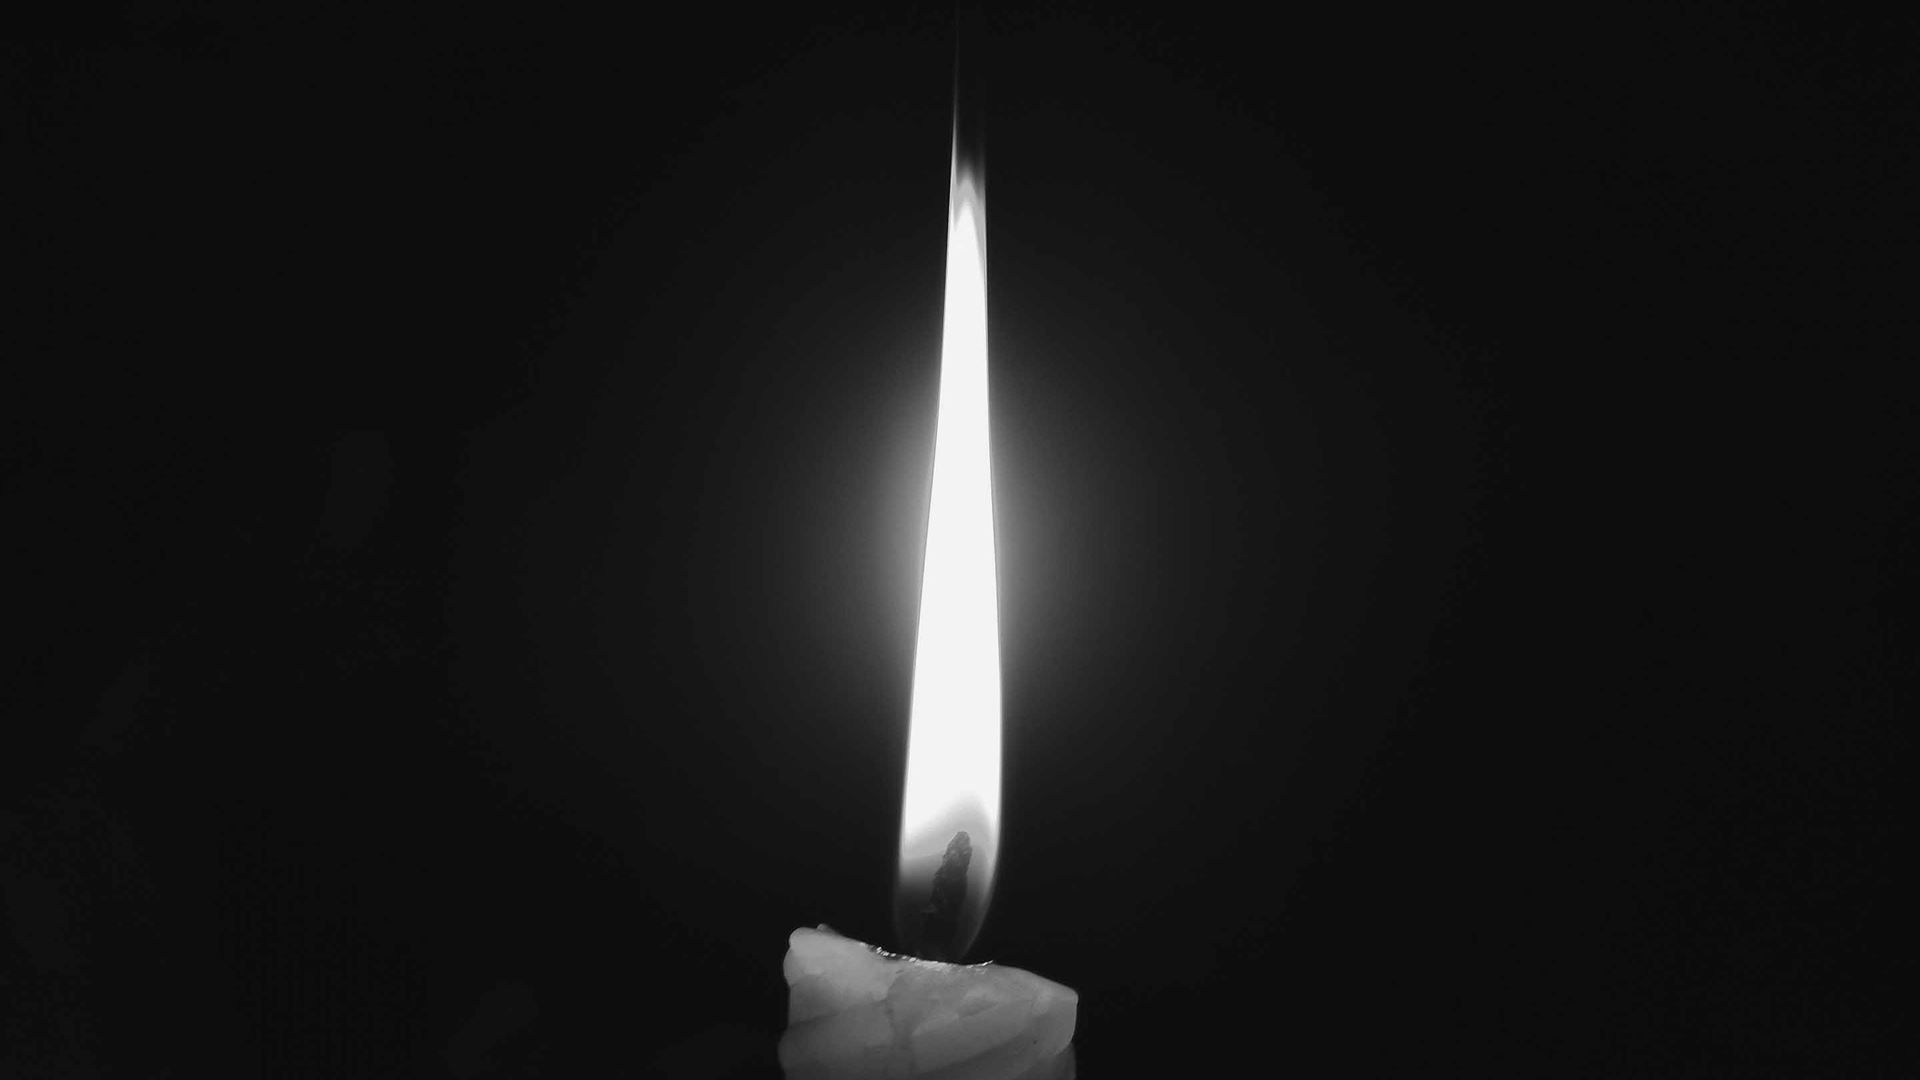 Candle Light Grayscale MacBook Air Wallpaper Download